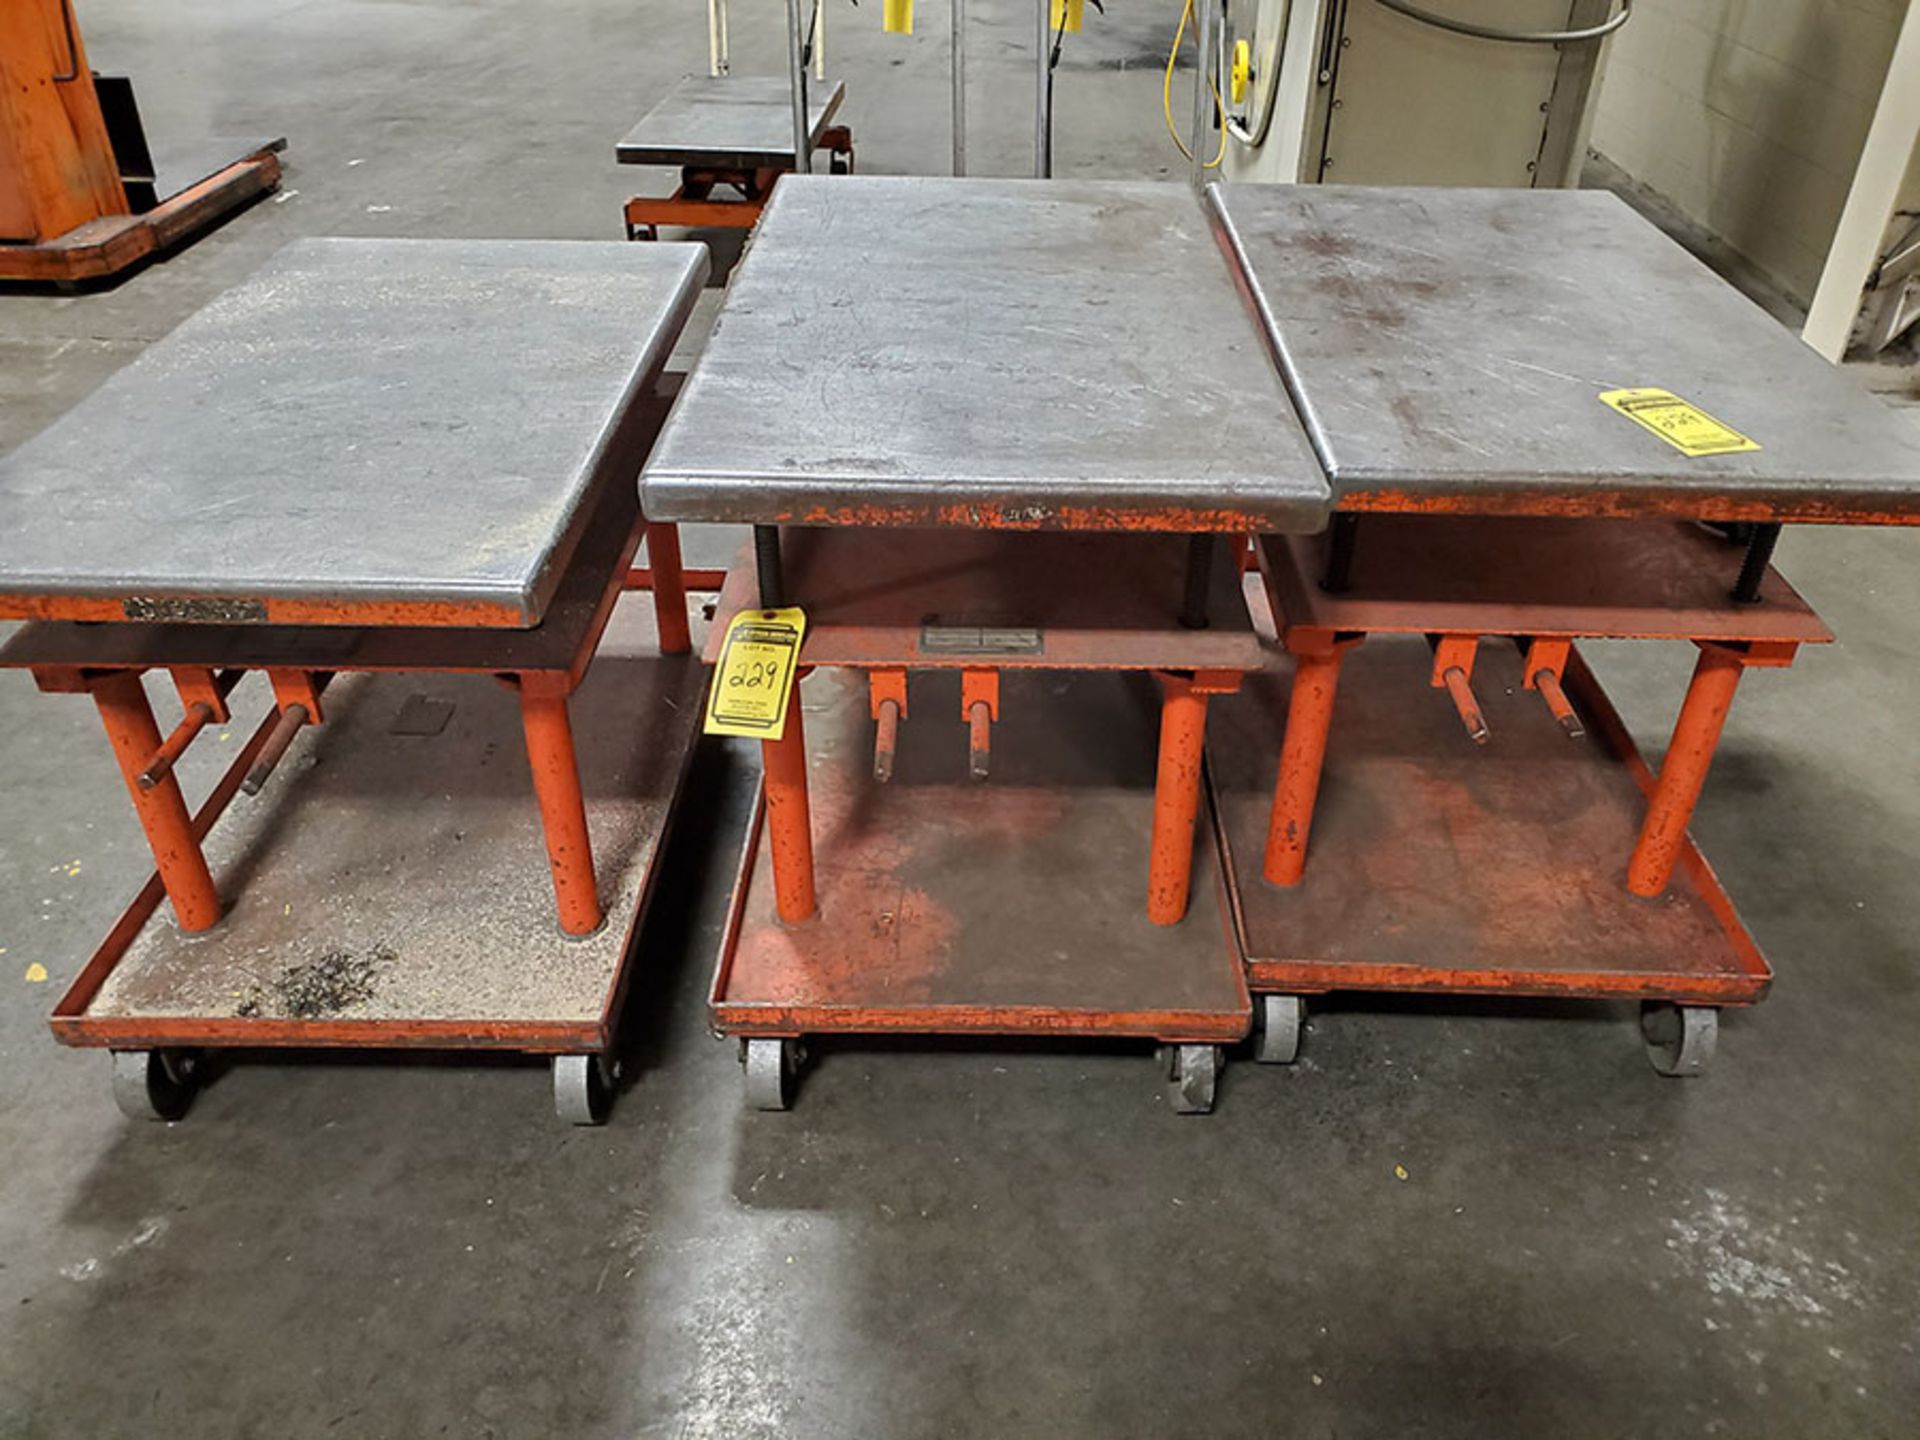 LOT OF (3) ECONOMY 2,000 LB. MECHANICAL DIE LIFT TABLES - Image 2 of 3